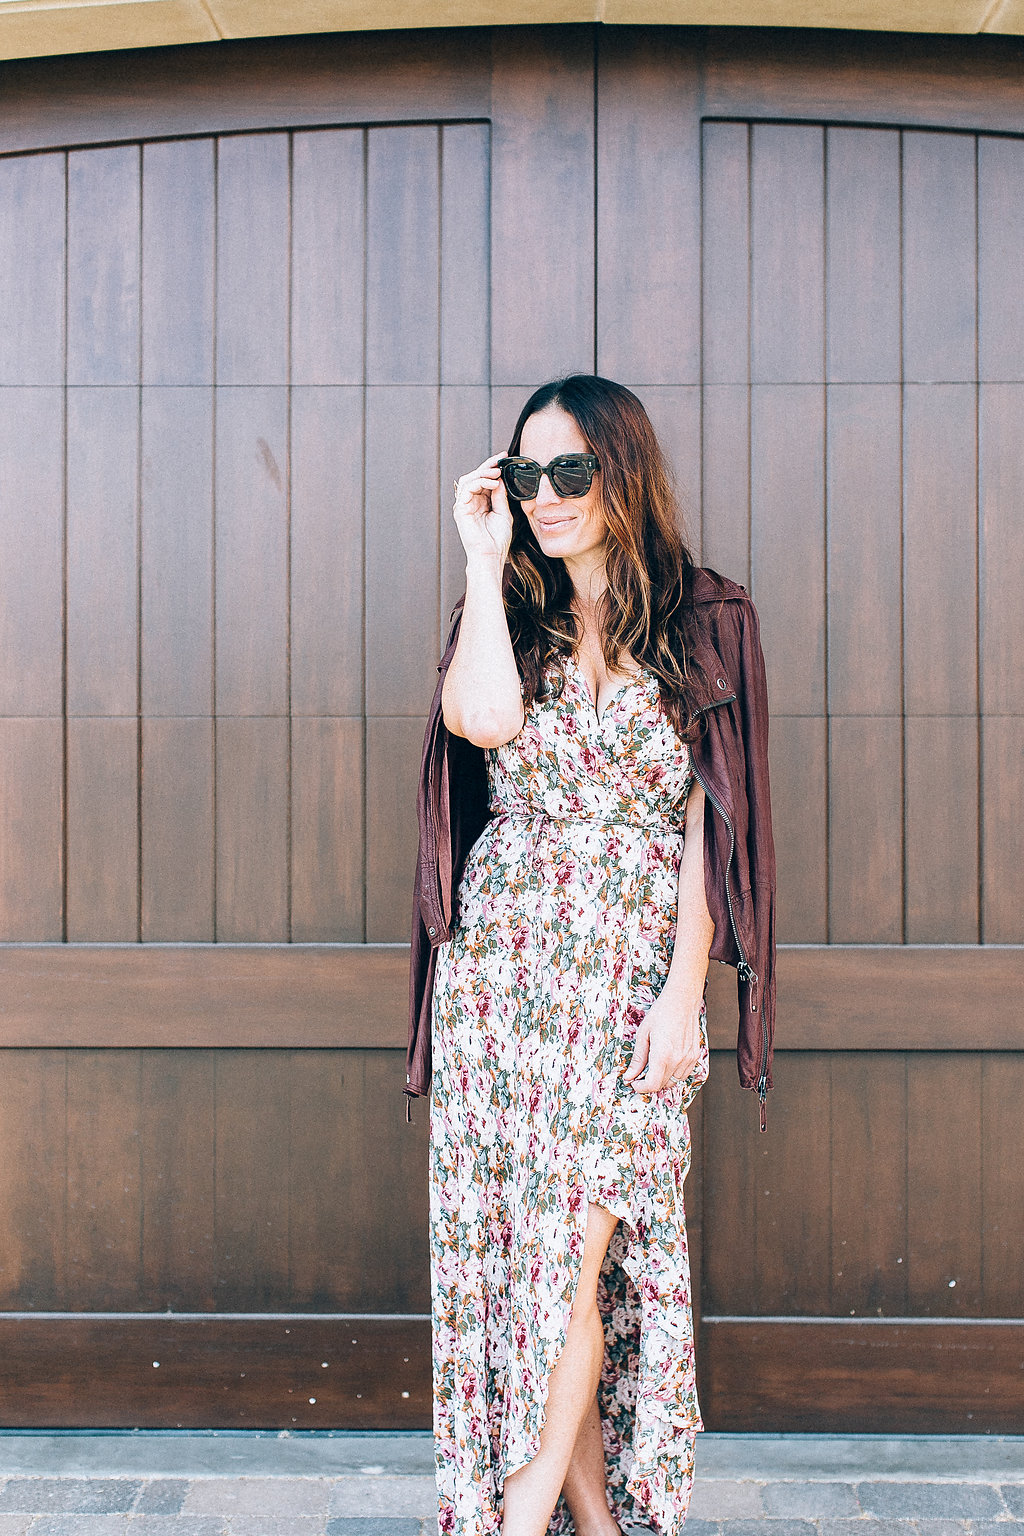 Wearing the Most Flattering Wrap Dresses for Fall